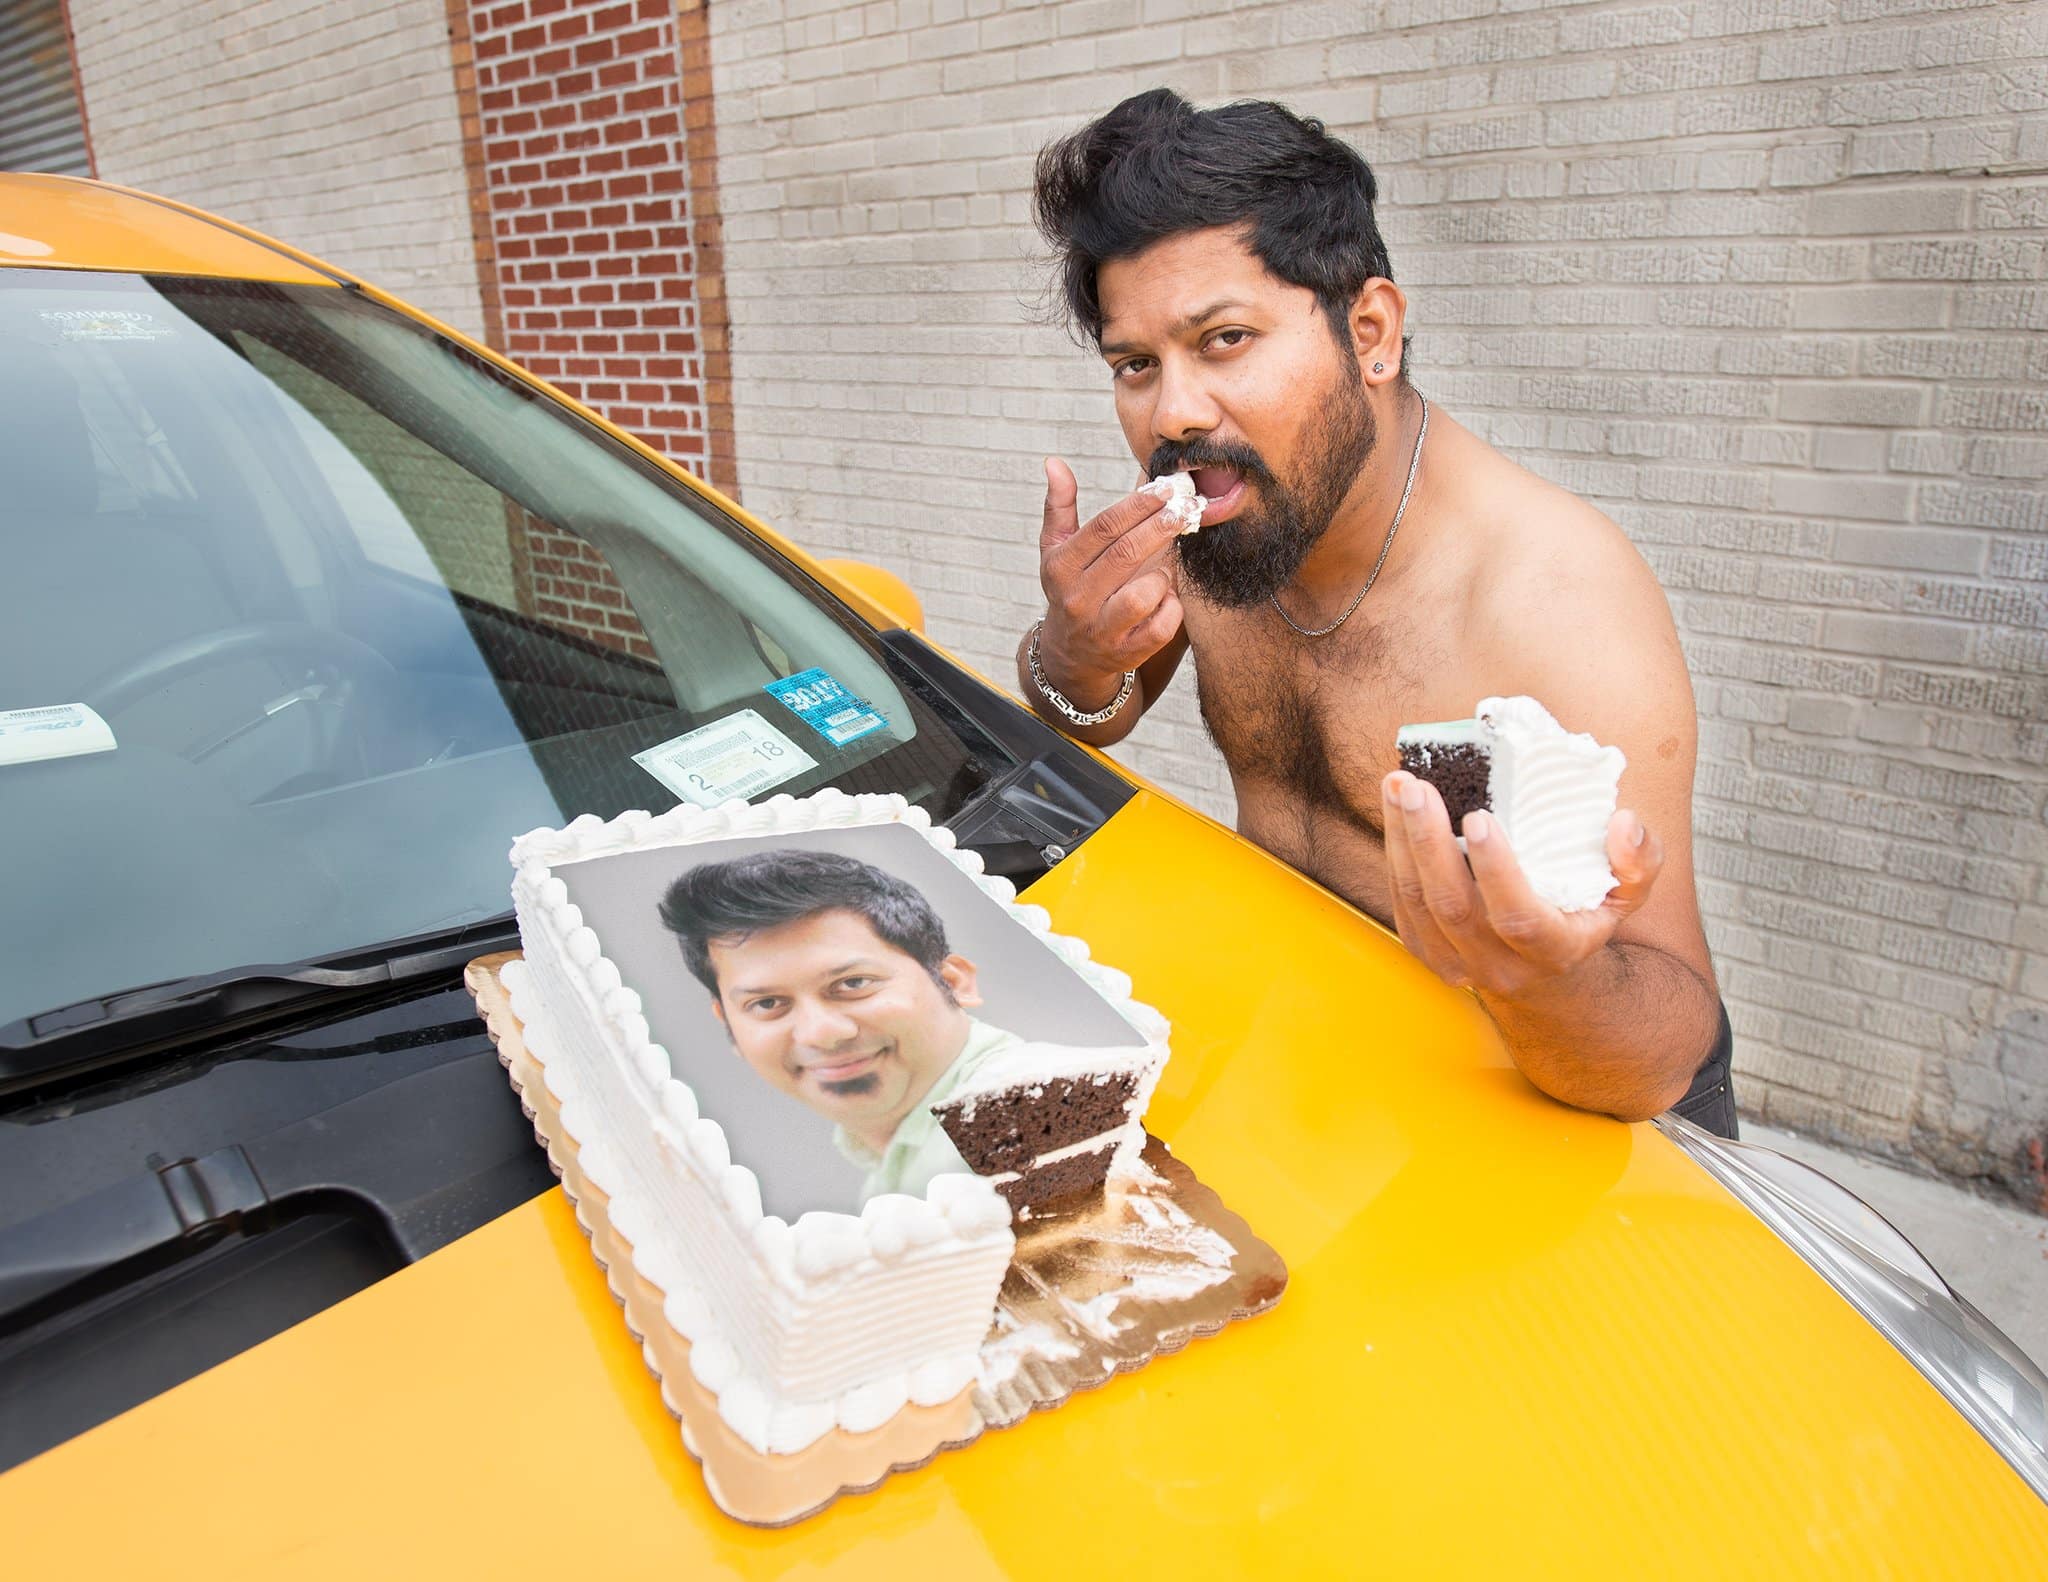 Charity NYC Taxi Drivers Calendar raised $ 60 000 to help immigrants